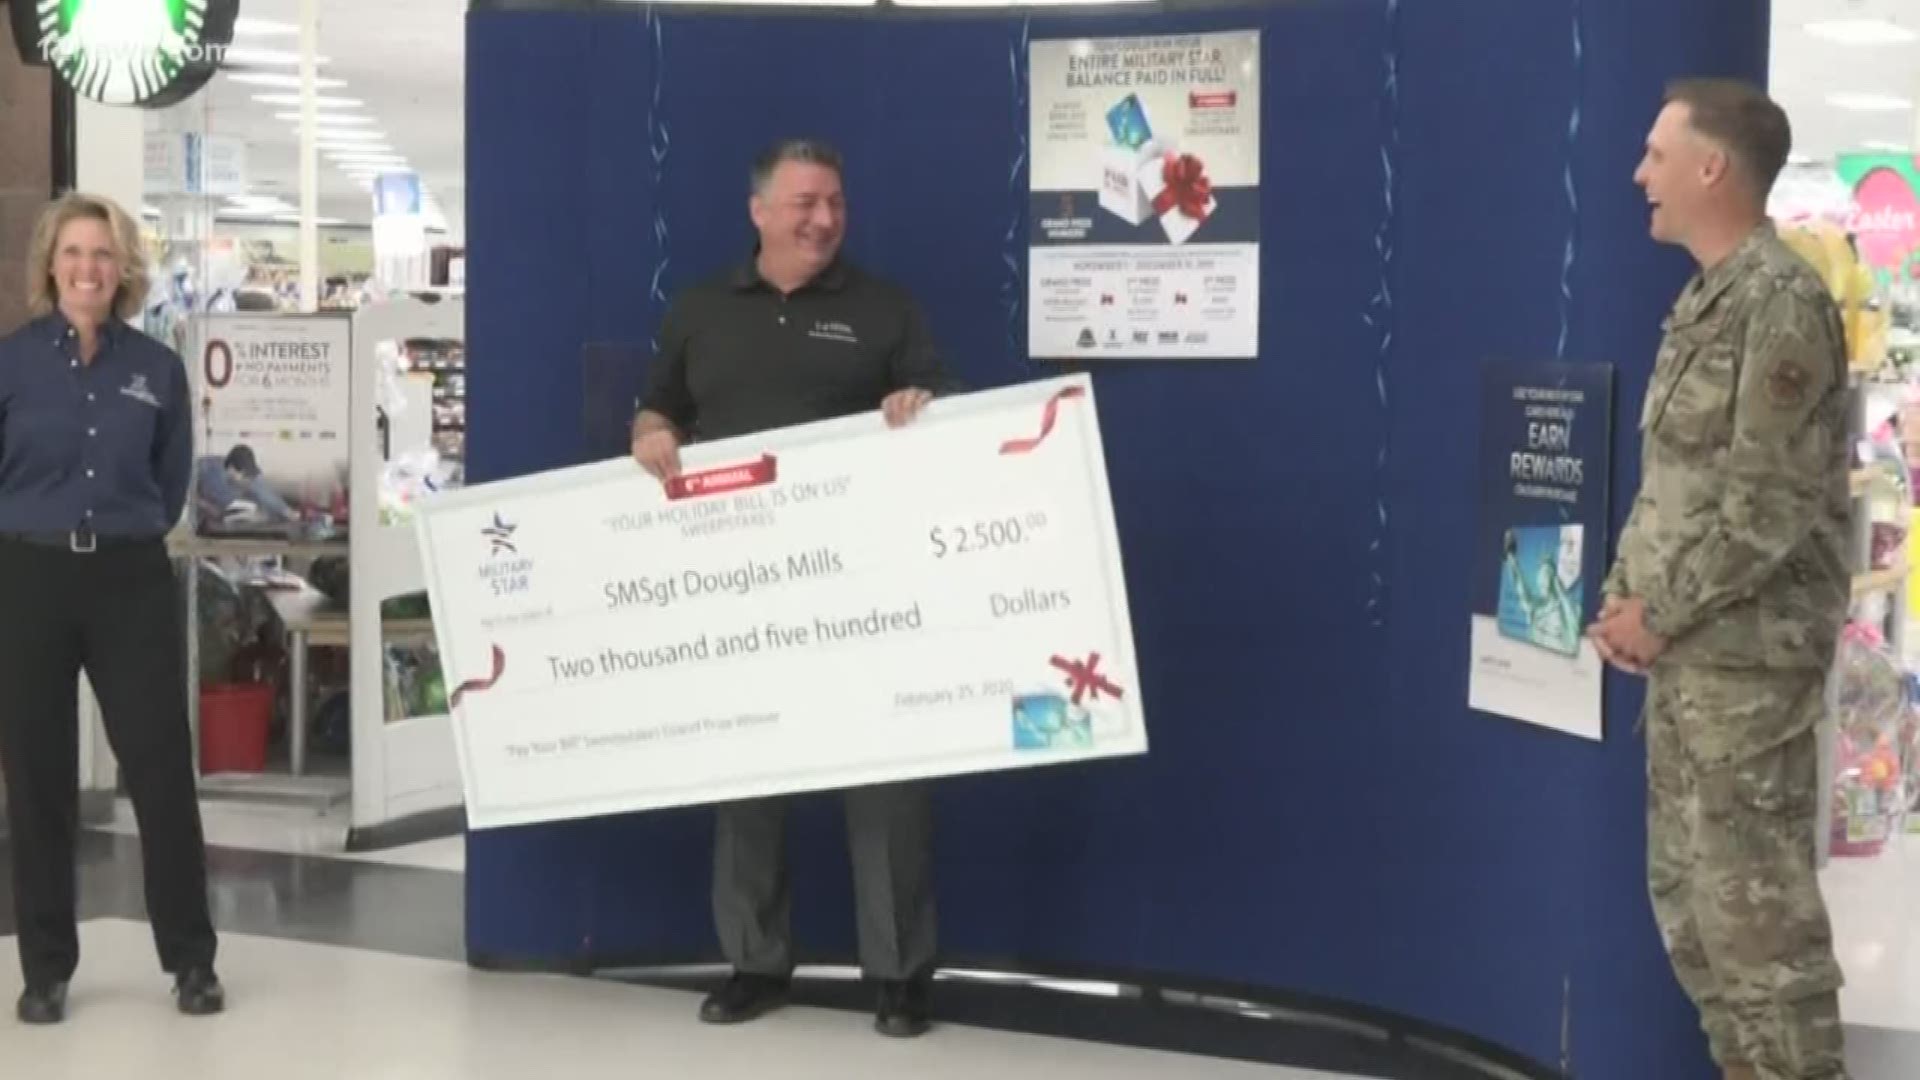 To celebrate Douglas Mills' service he won $2500 to spend on base. Mills was entered to win, in part, for how much he swipes his military star card.